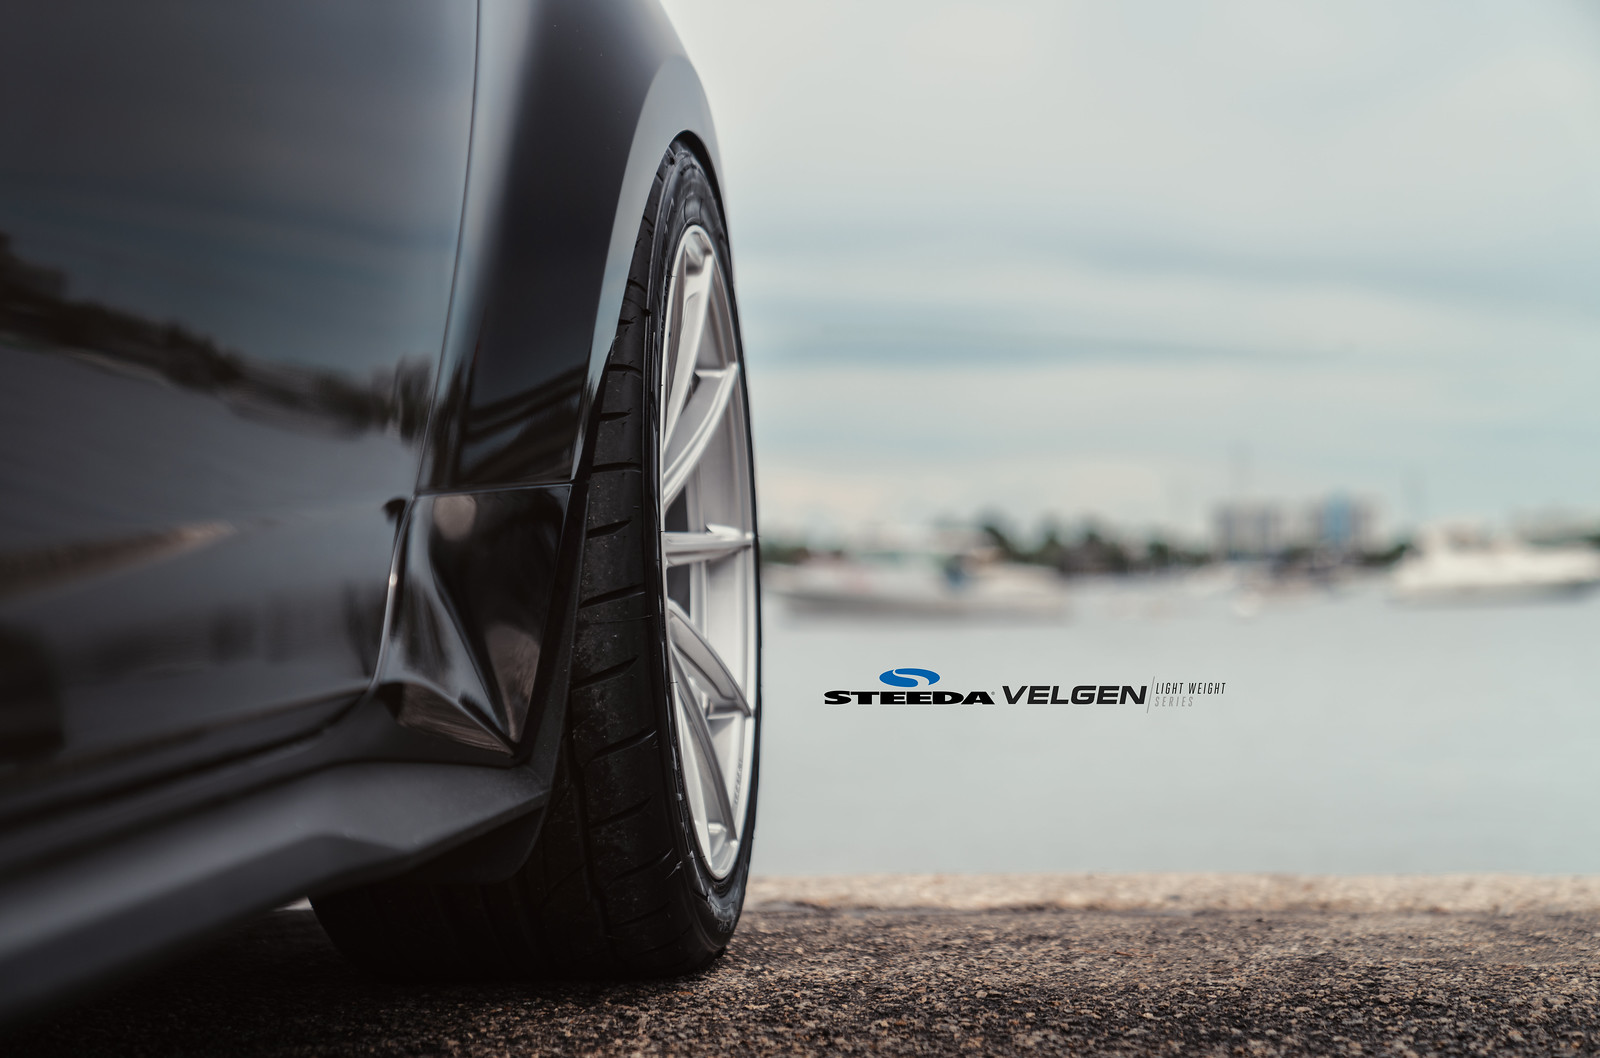 S650 Mustang Warning about HRE wheels and how they fit S650 Velgen Light Weight Series Vf10